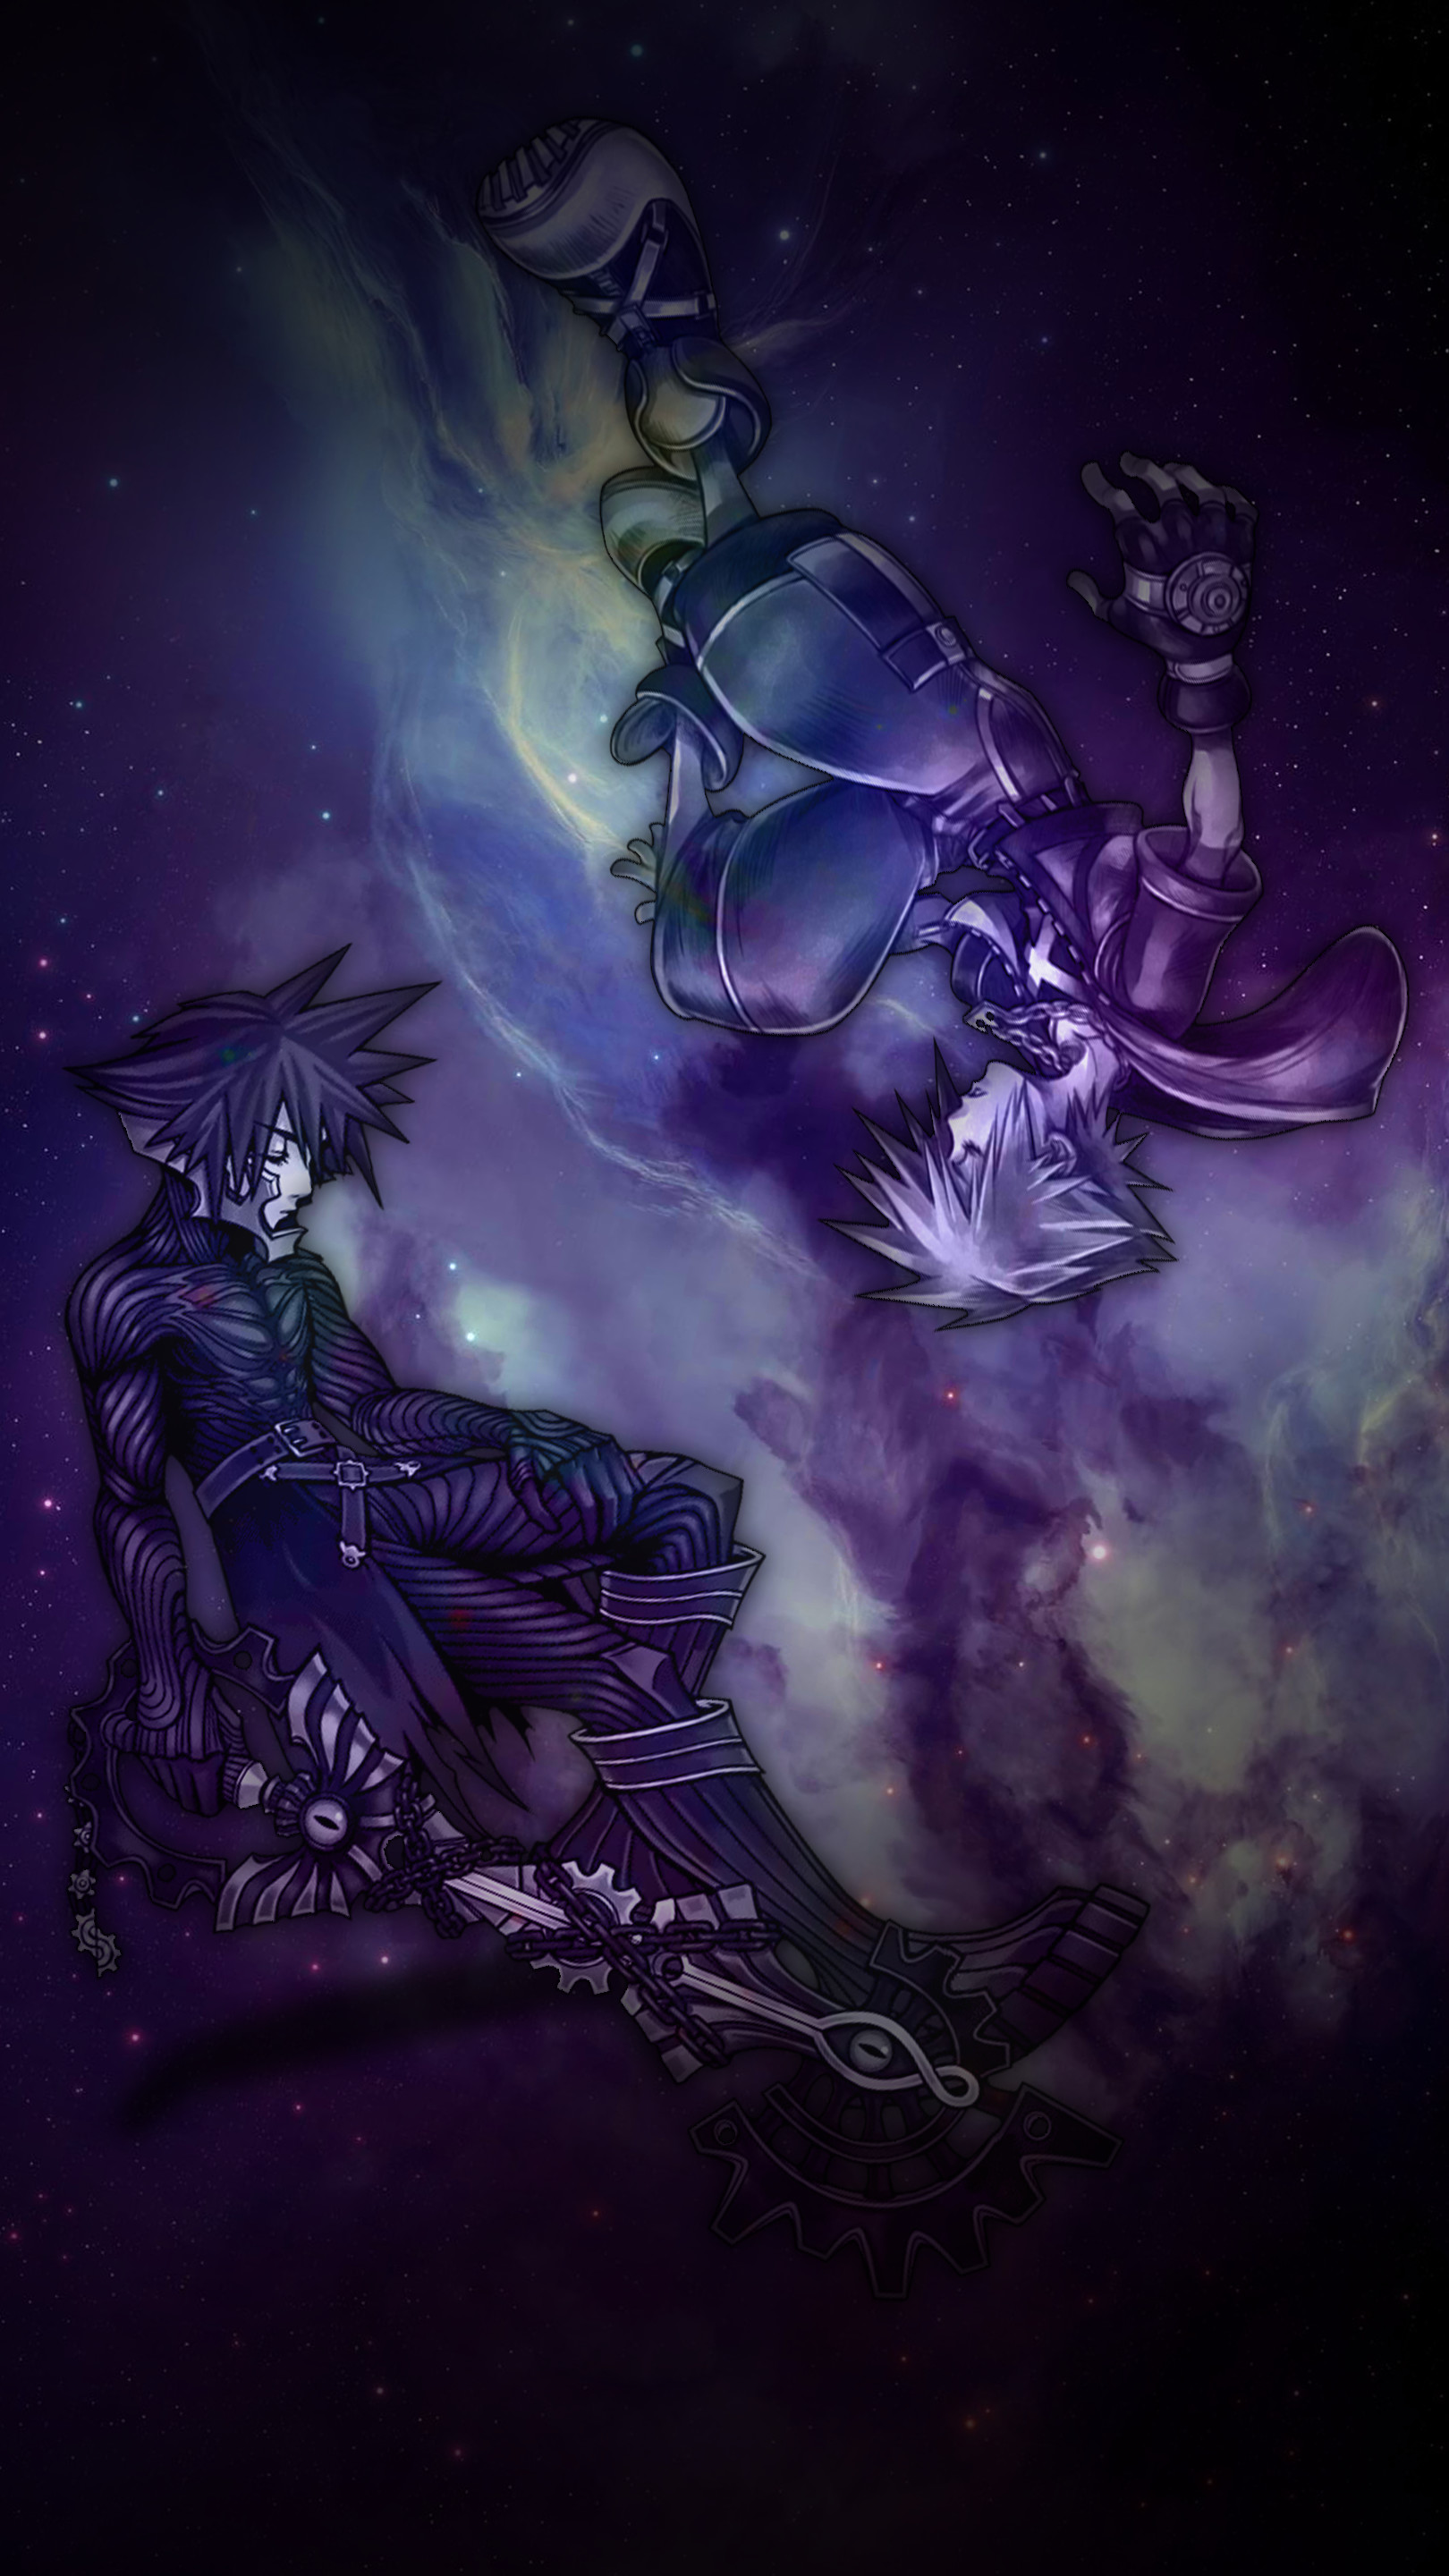 1620x2880 ... kingdom hearts iPhone wallpaper for iPhone 6 plus ...